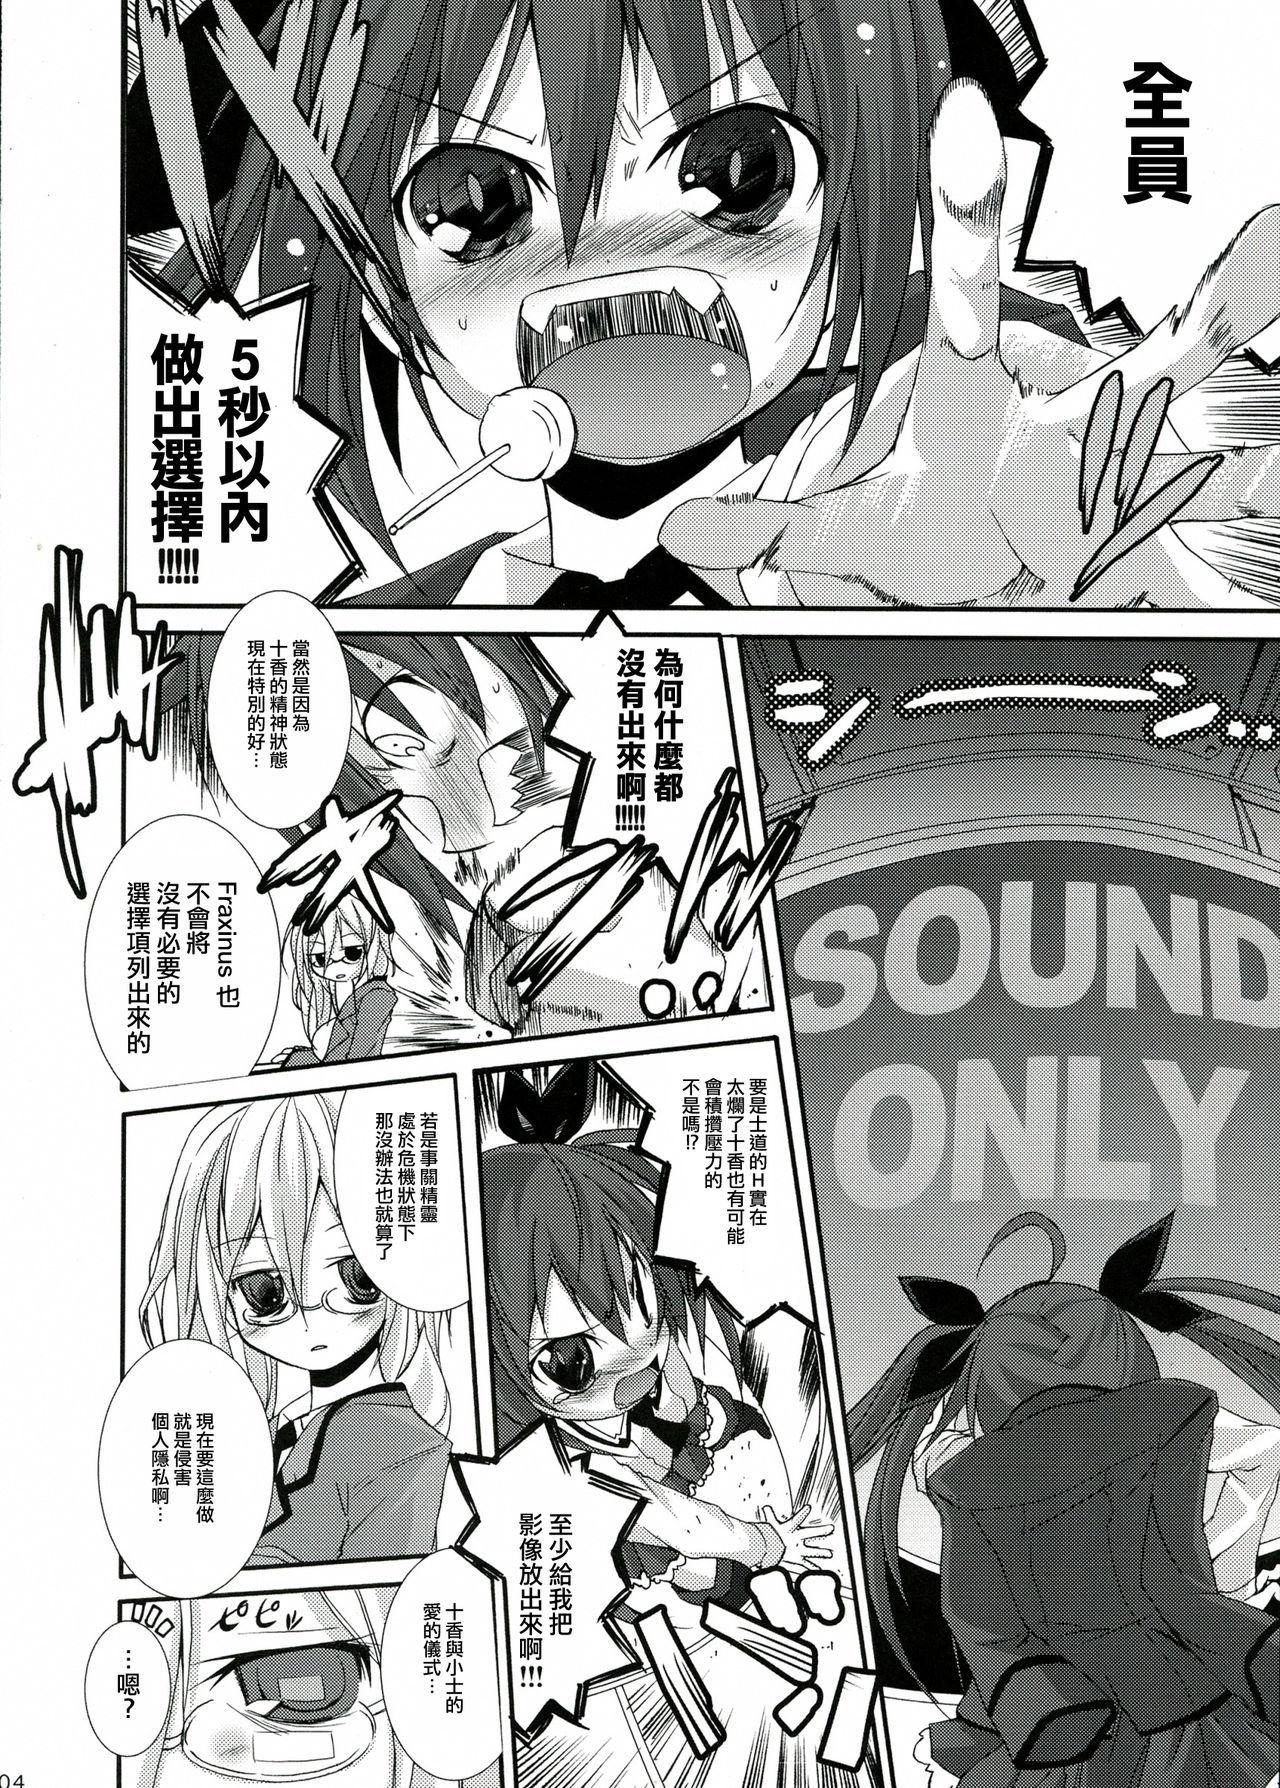 Dad INT32.1 - Date a live Chastity - Page 6